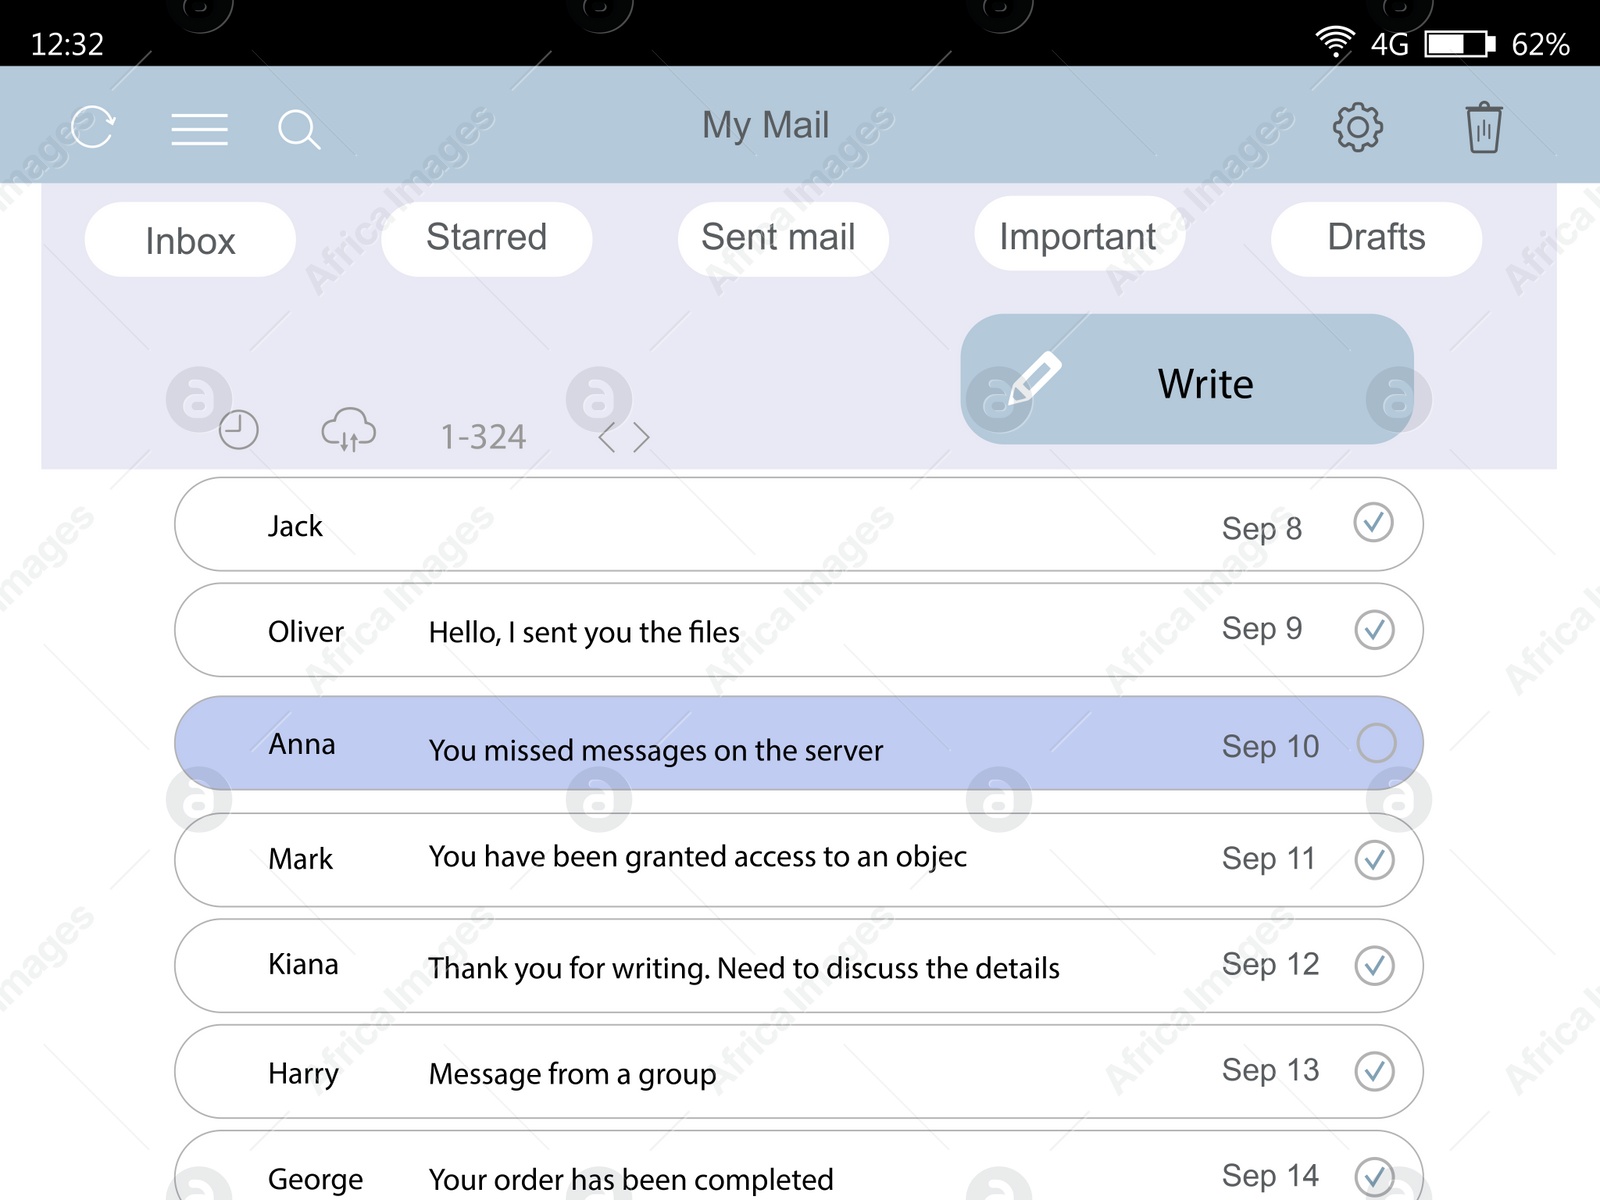 Illustration of Interface of mailbox, illustration. User's account with emails